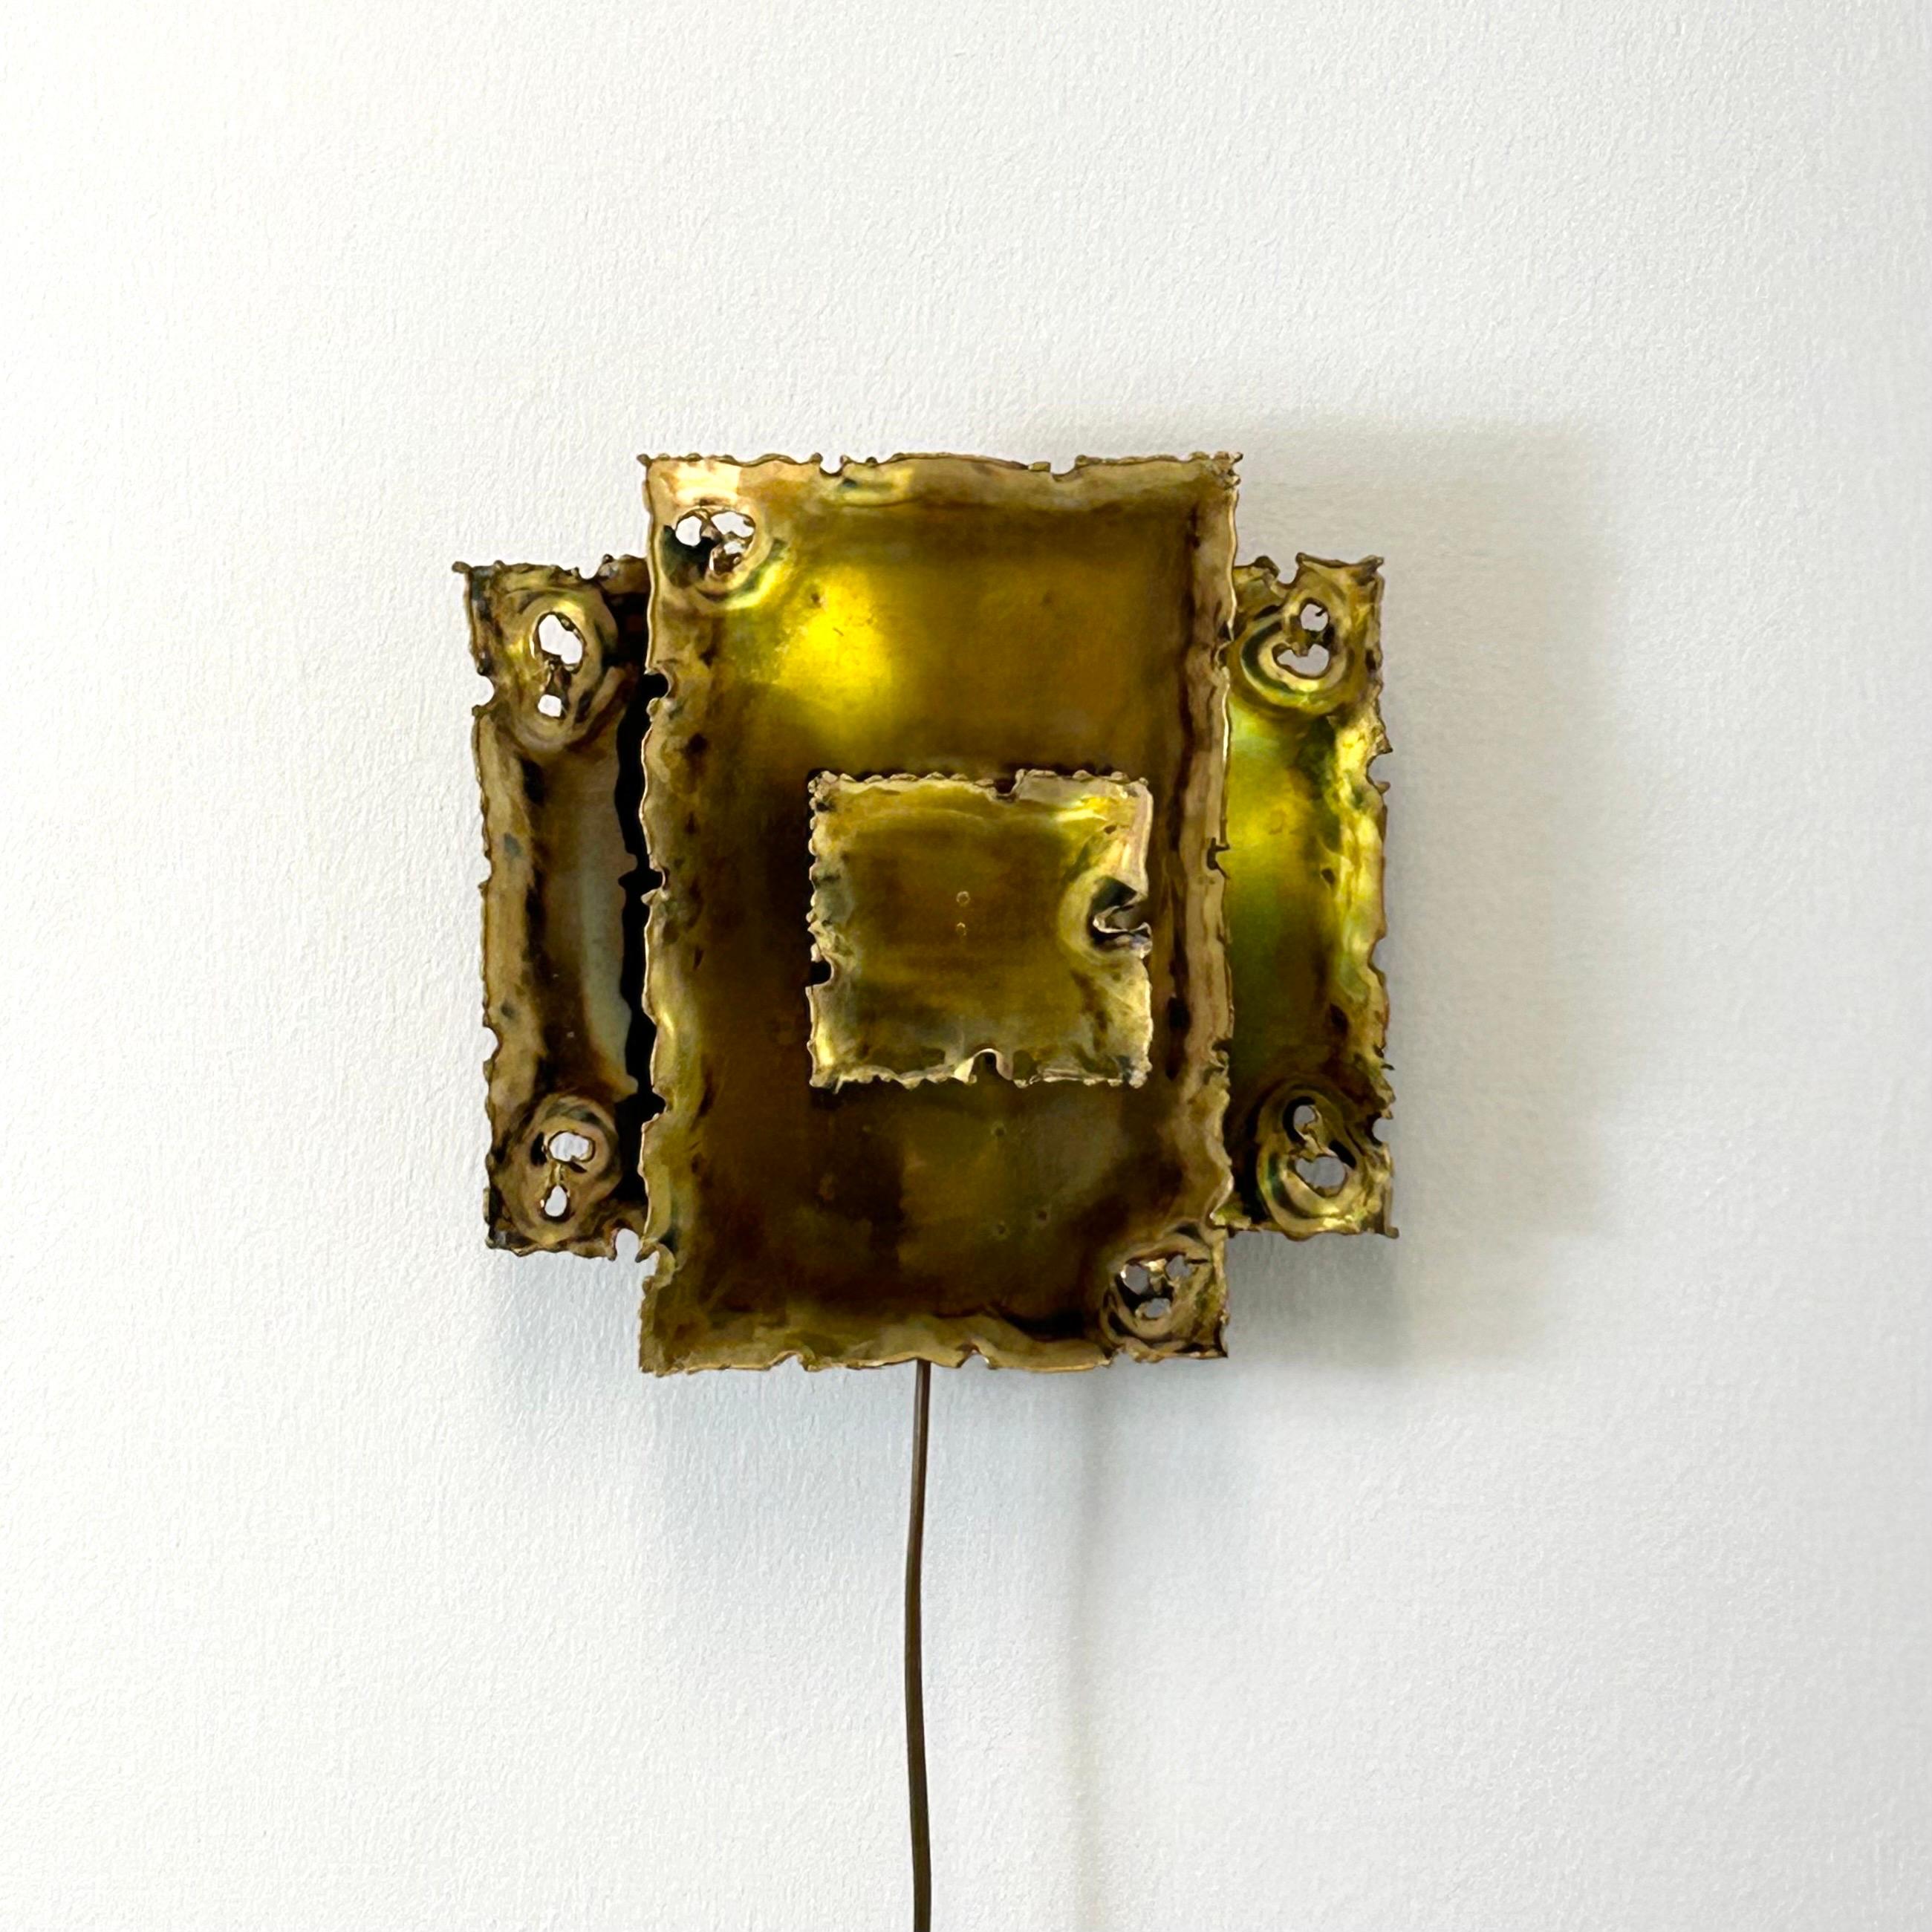 Danish A Square Brass Wall Lamp by Svend Aage Holm Sorensen, 1960s, Denmark For Sale